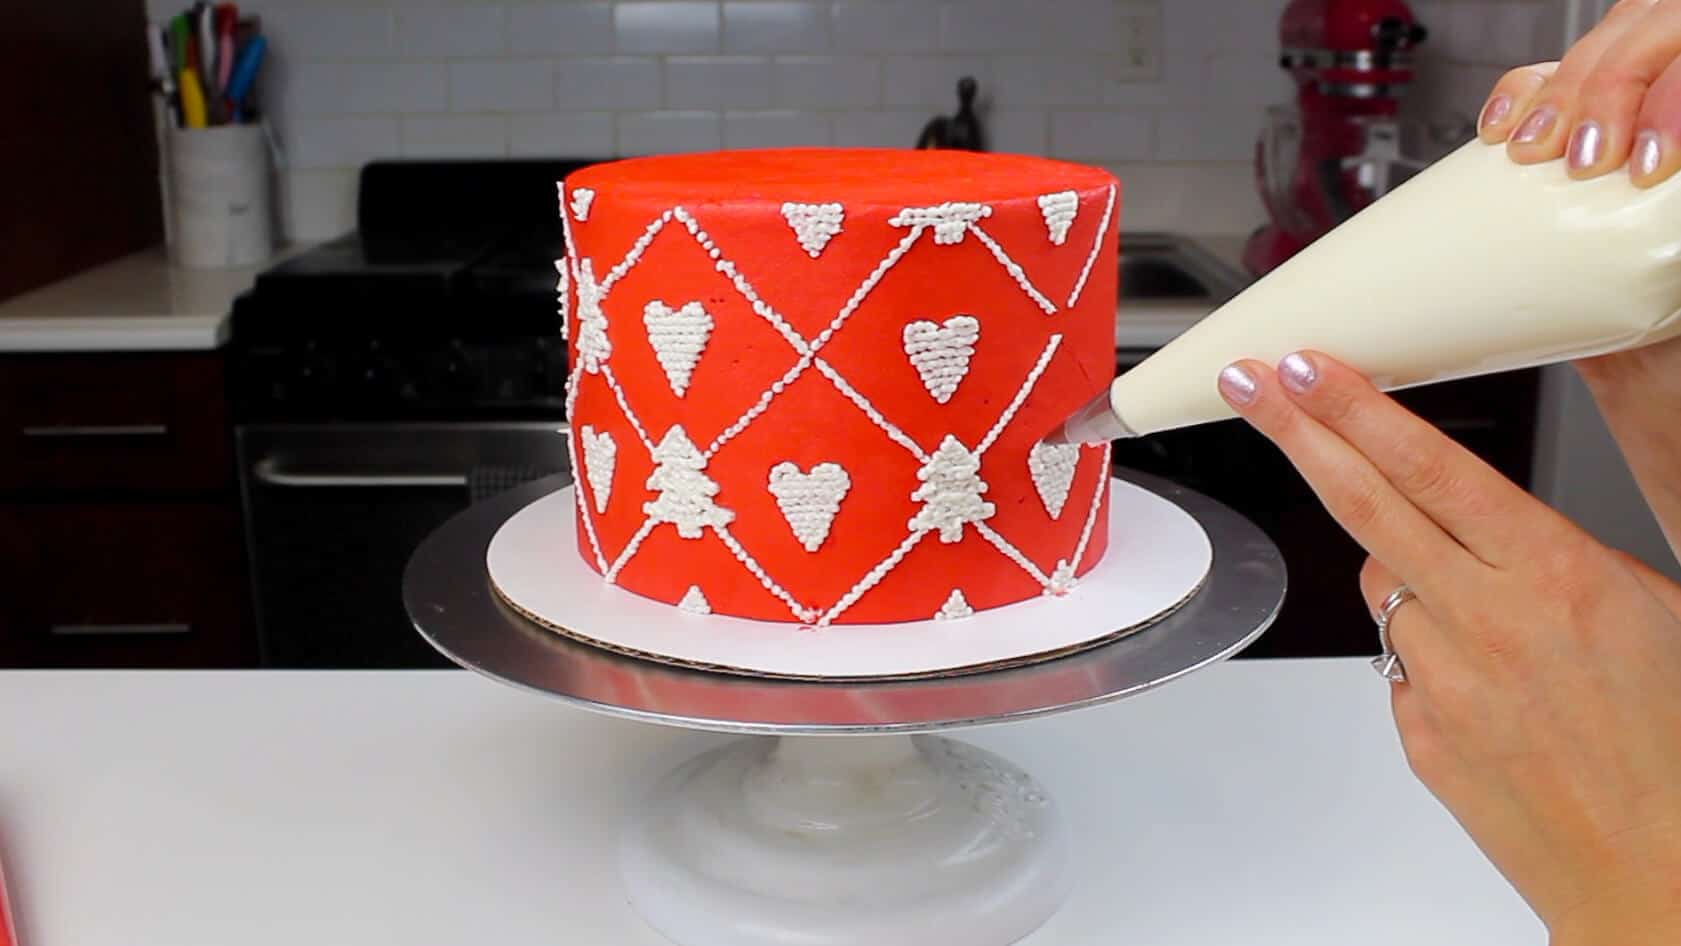 image of piping pattern onto knitted sweater cake